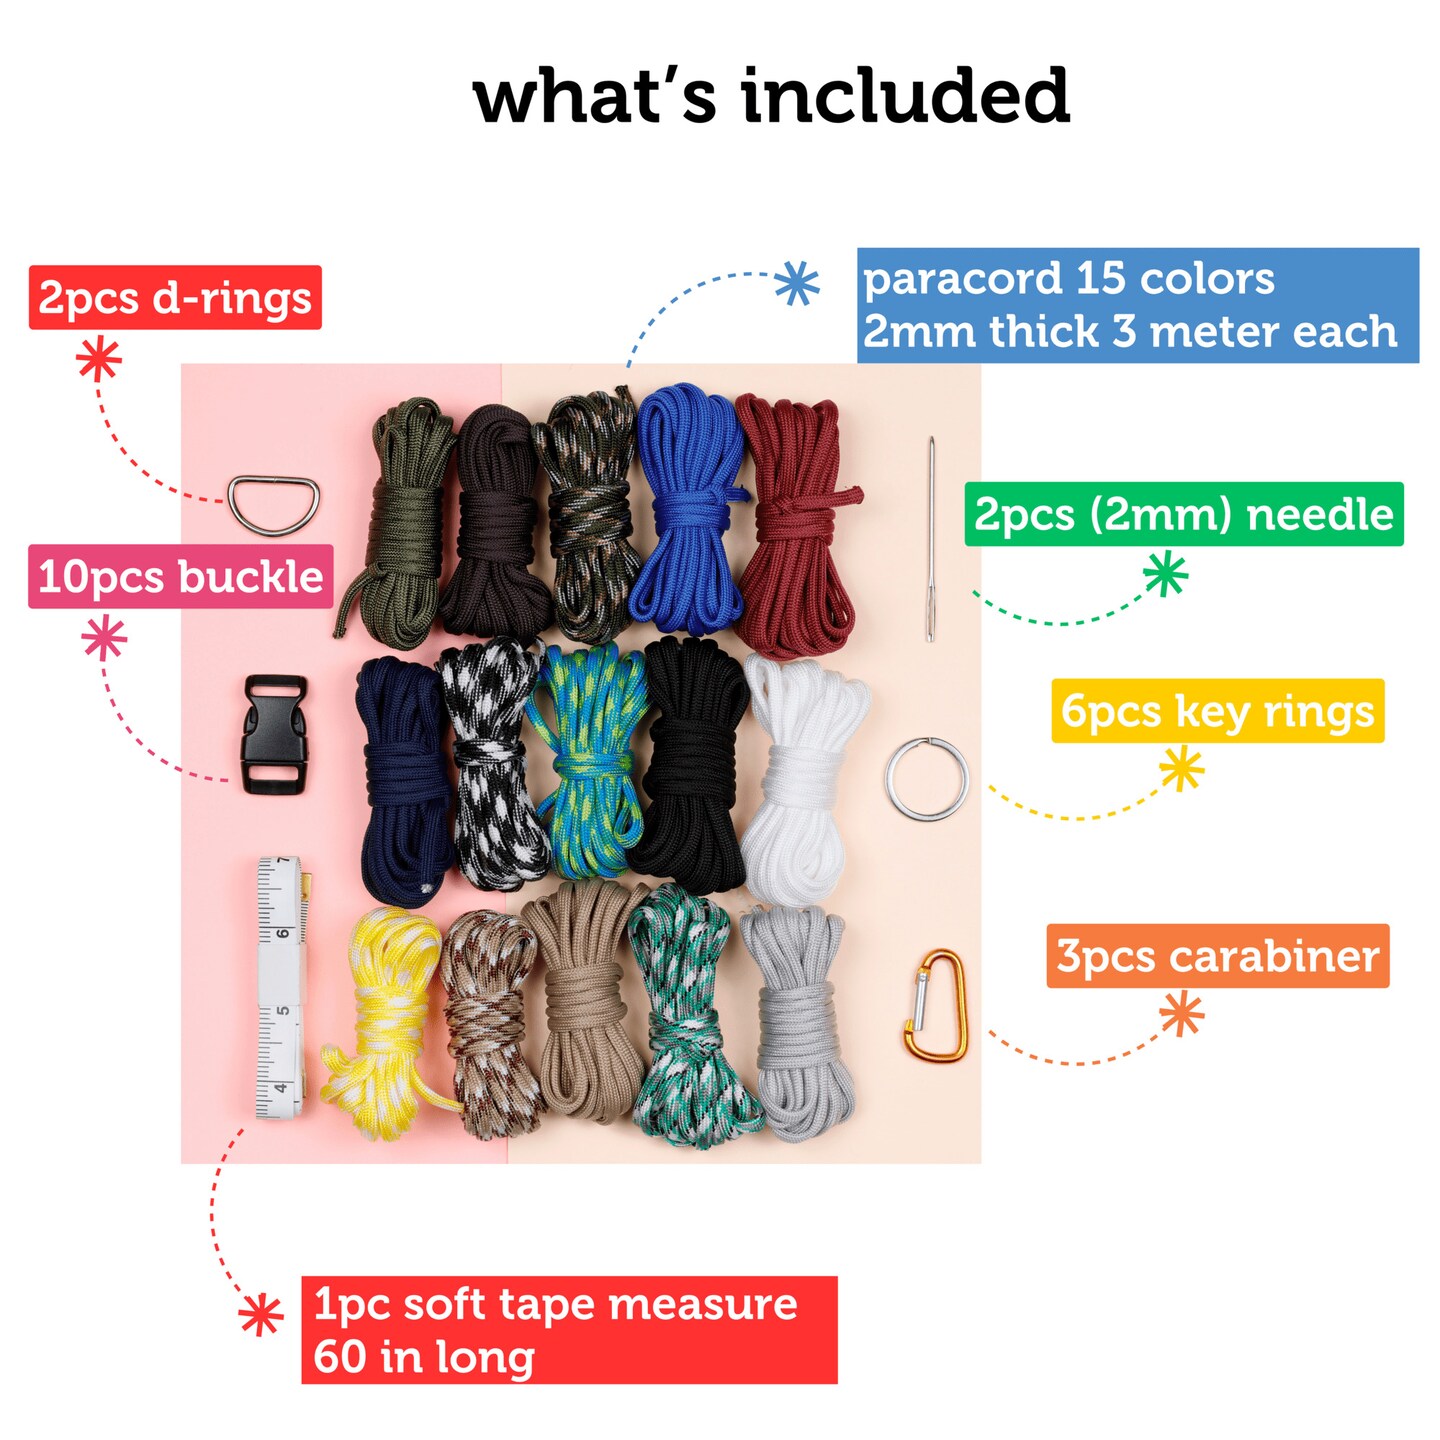 WEREWOLVES Paracord 550 Combo Crafting Kits - Survival Paracord Bracelet  Rope Kits - Tent Rope Parachute Cord with Soft Tape Measure, Buckles, and  Key